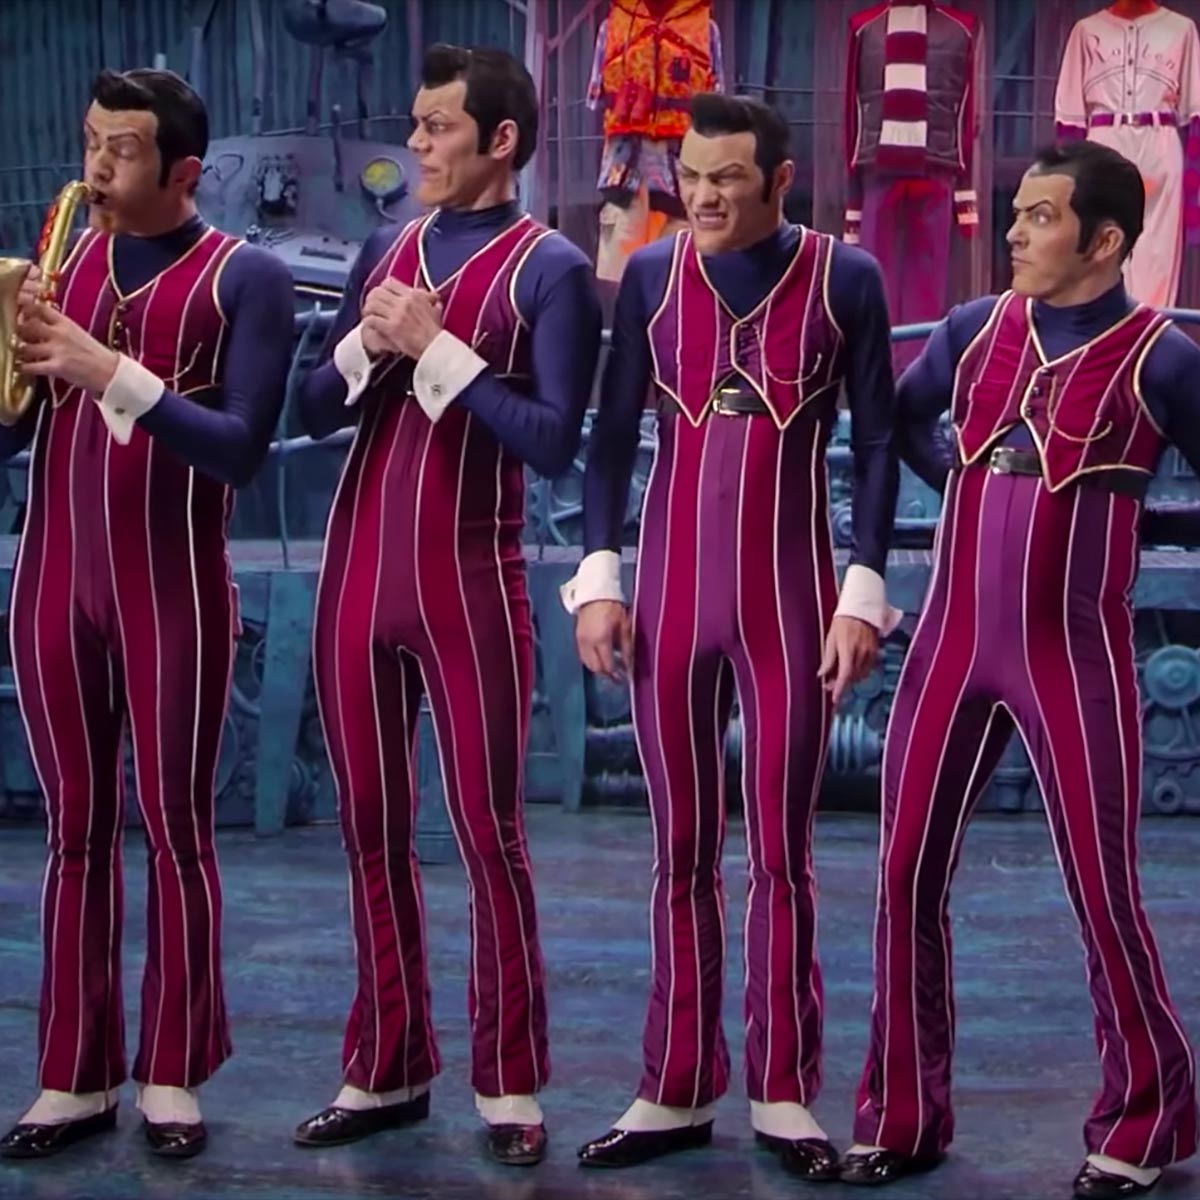 Play We Are Number One Music Sheet Play On Virtual Piano - we are number on meme roblox code if